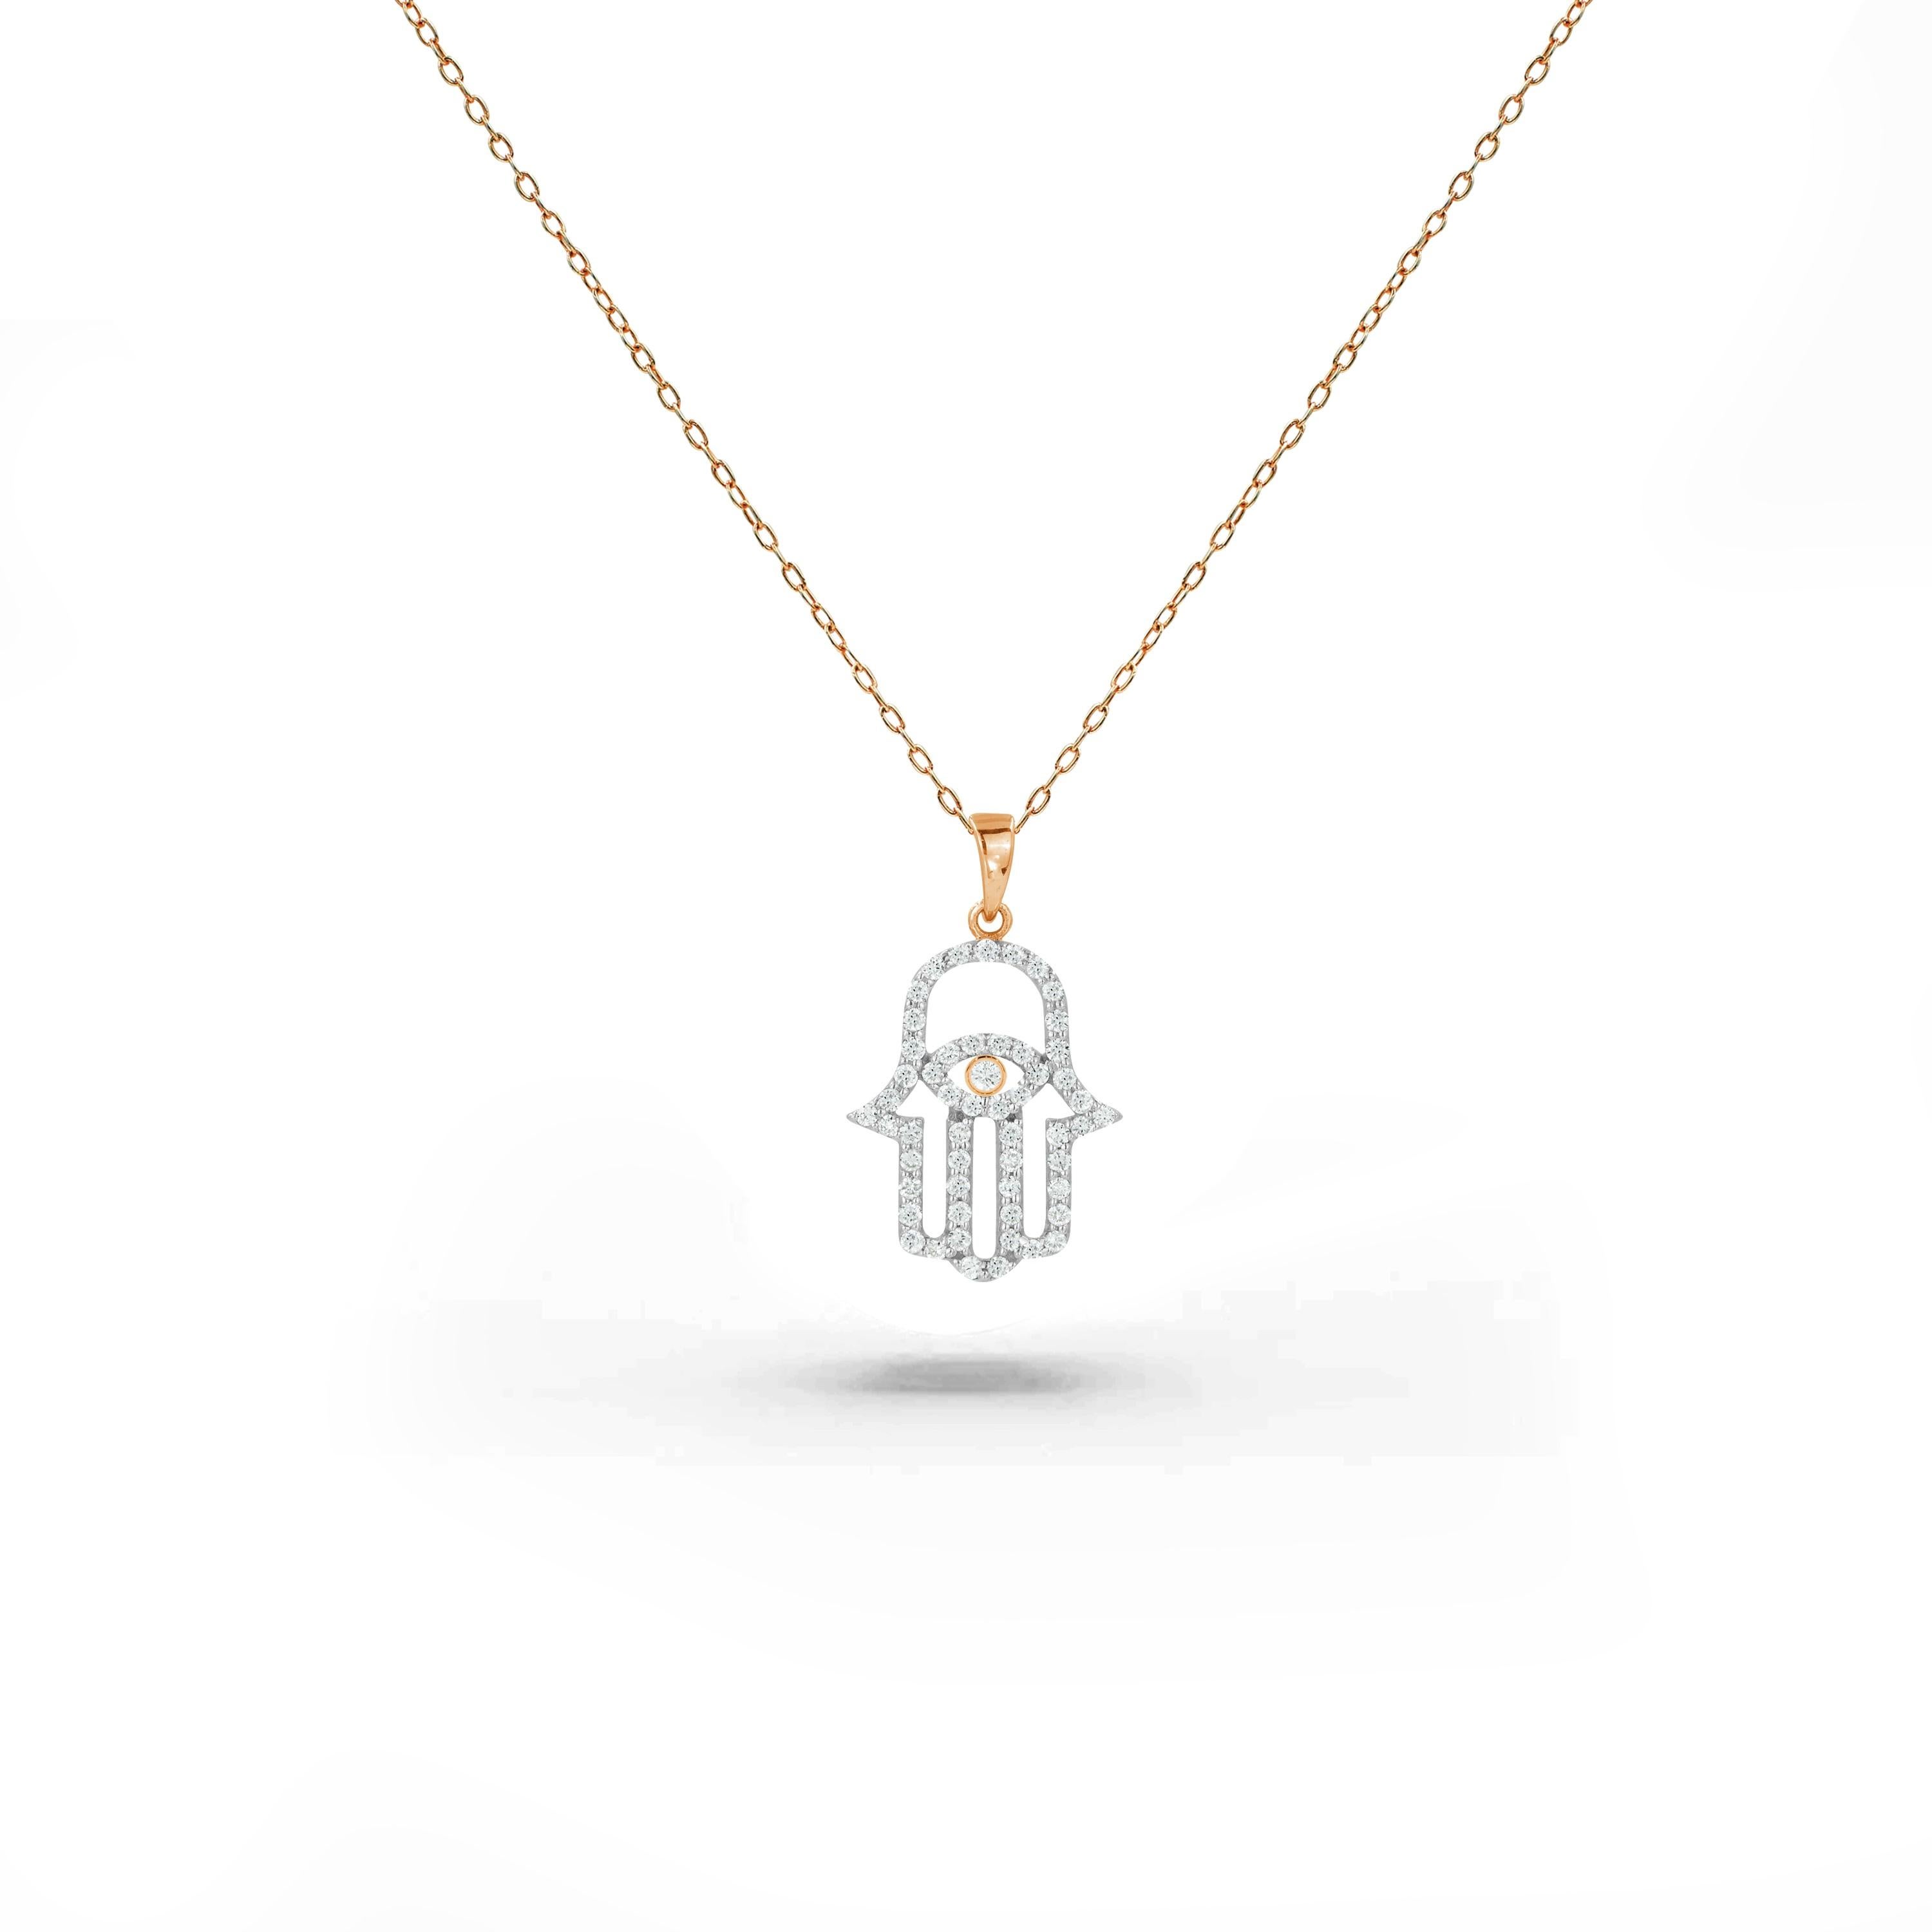 Beautiful little Hamsa Hand Pendant is made of 14k solid gold.
Available in three colors, White Gold / Rose Gold / Yellow Gold.

Delicate Minimal Necklace is adorned with natural white round cut pave set diamonds. Perfect for wearing by itself for a